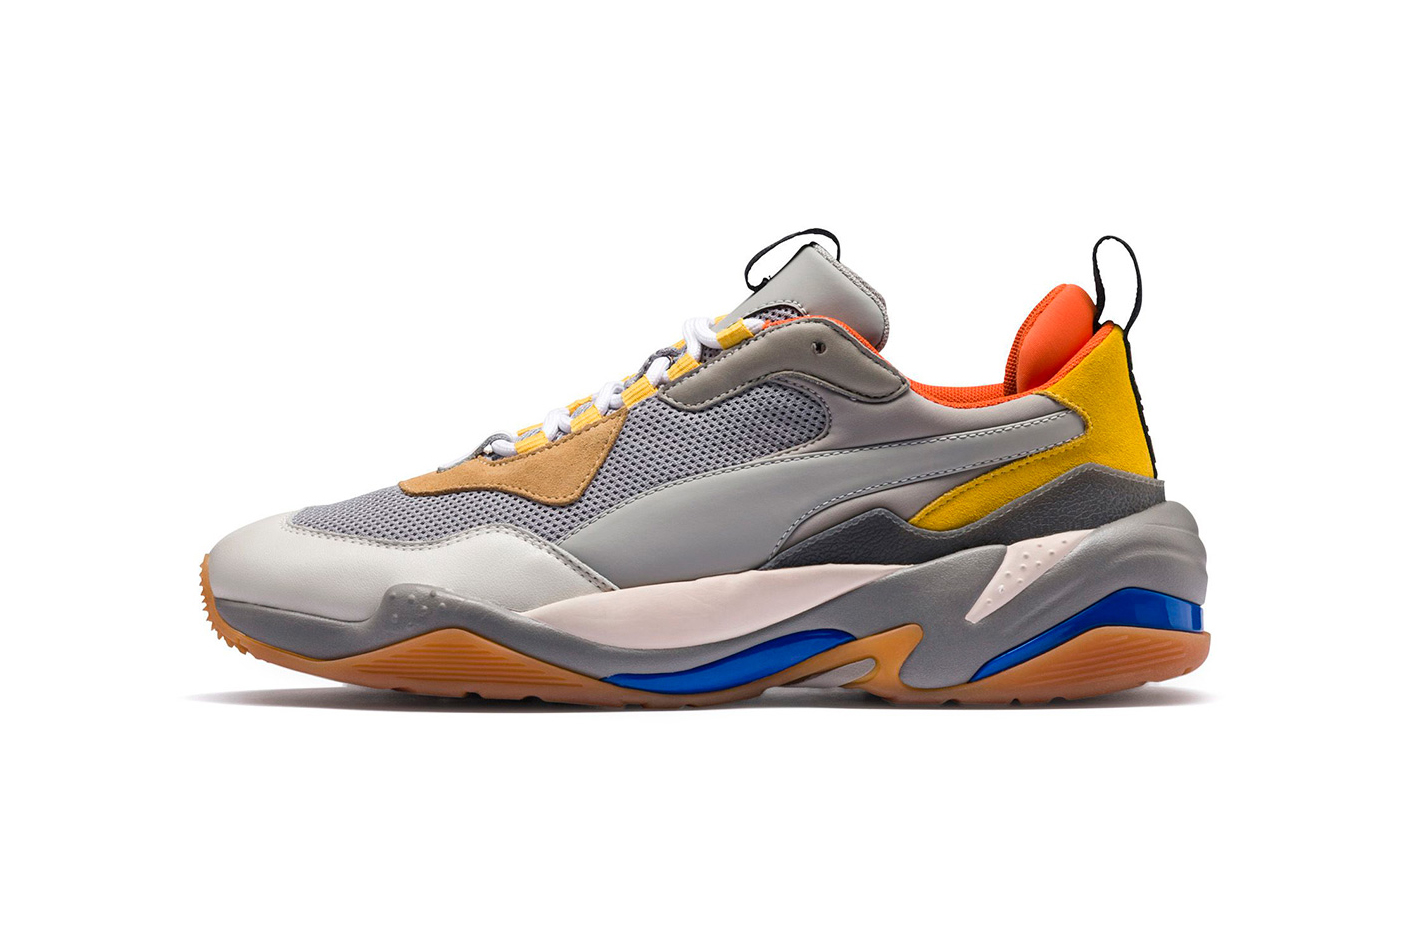 root Allegations Successful PUMA Thunder Spectra in Grey, Orange & Yellow | Hypebeast